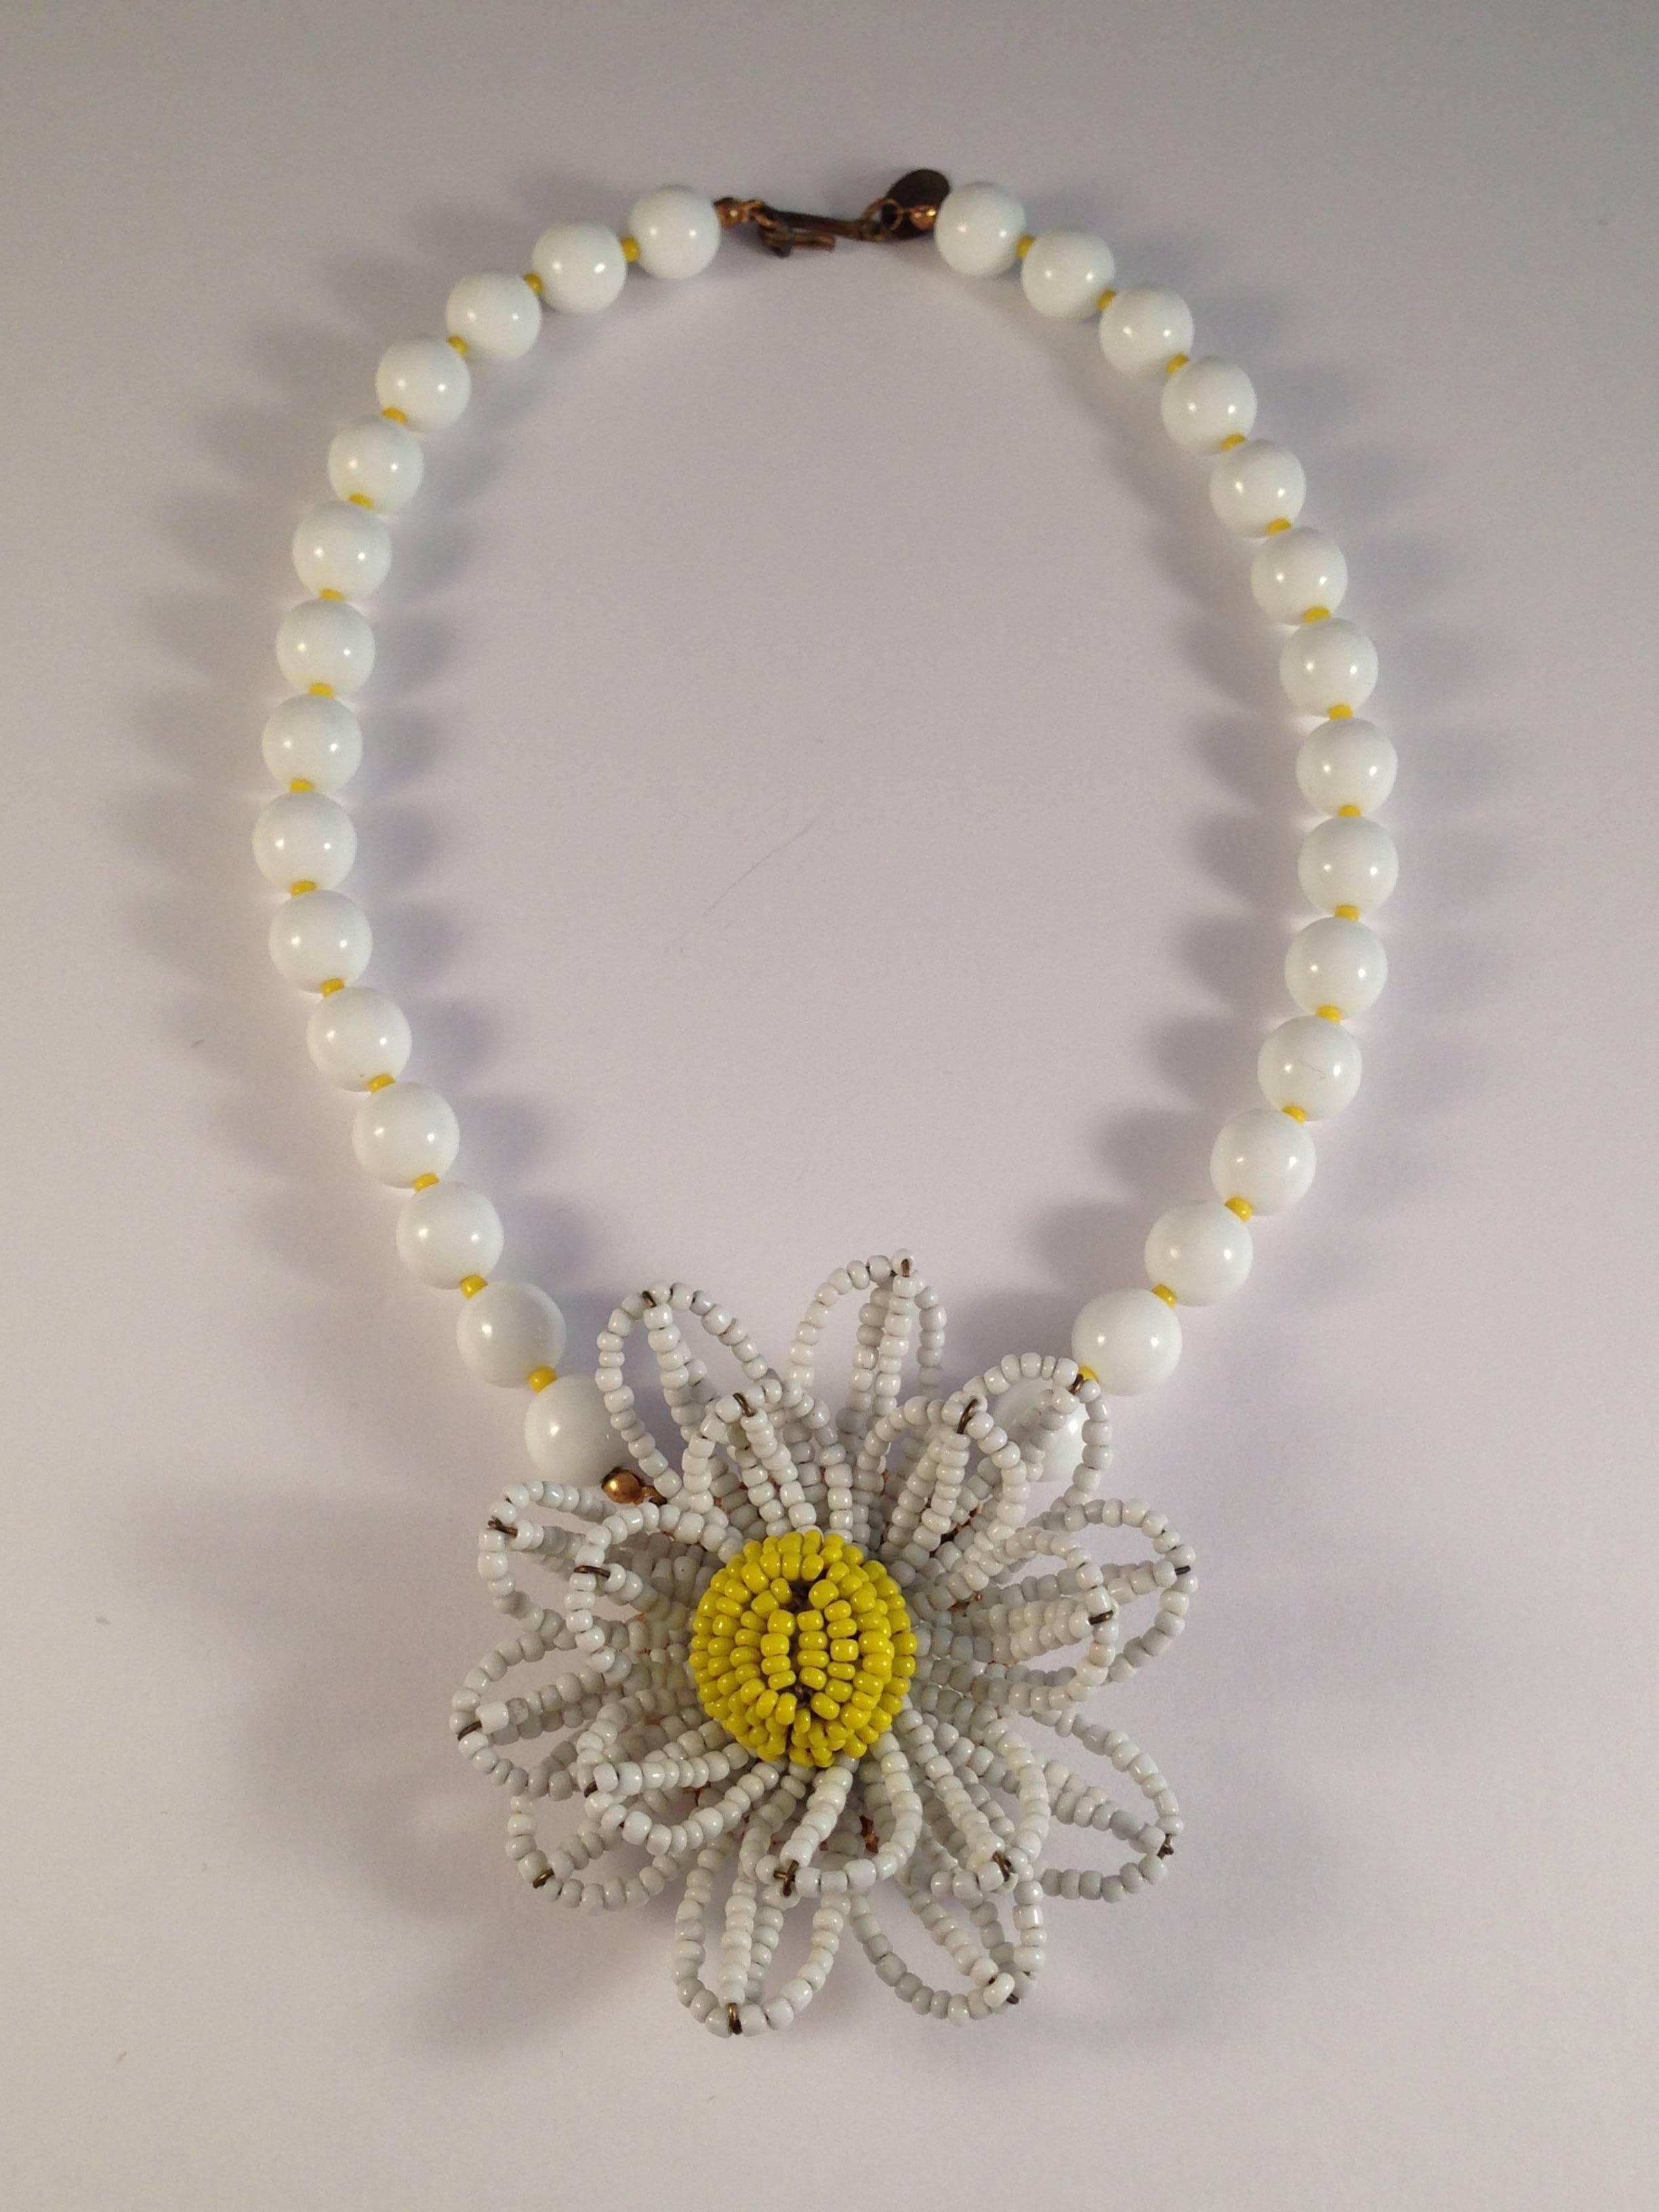 This is so fun for Spring. It is a 1950s Miriam Haskell necklace with a beaded daisy pendant. The pendant measures approximately 2 1/2" in diameter and is made up of tiny glass seed beads. The necklace measures 15" (not including the